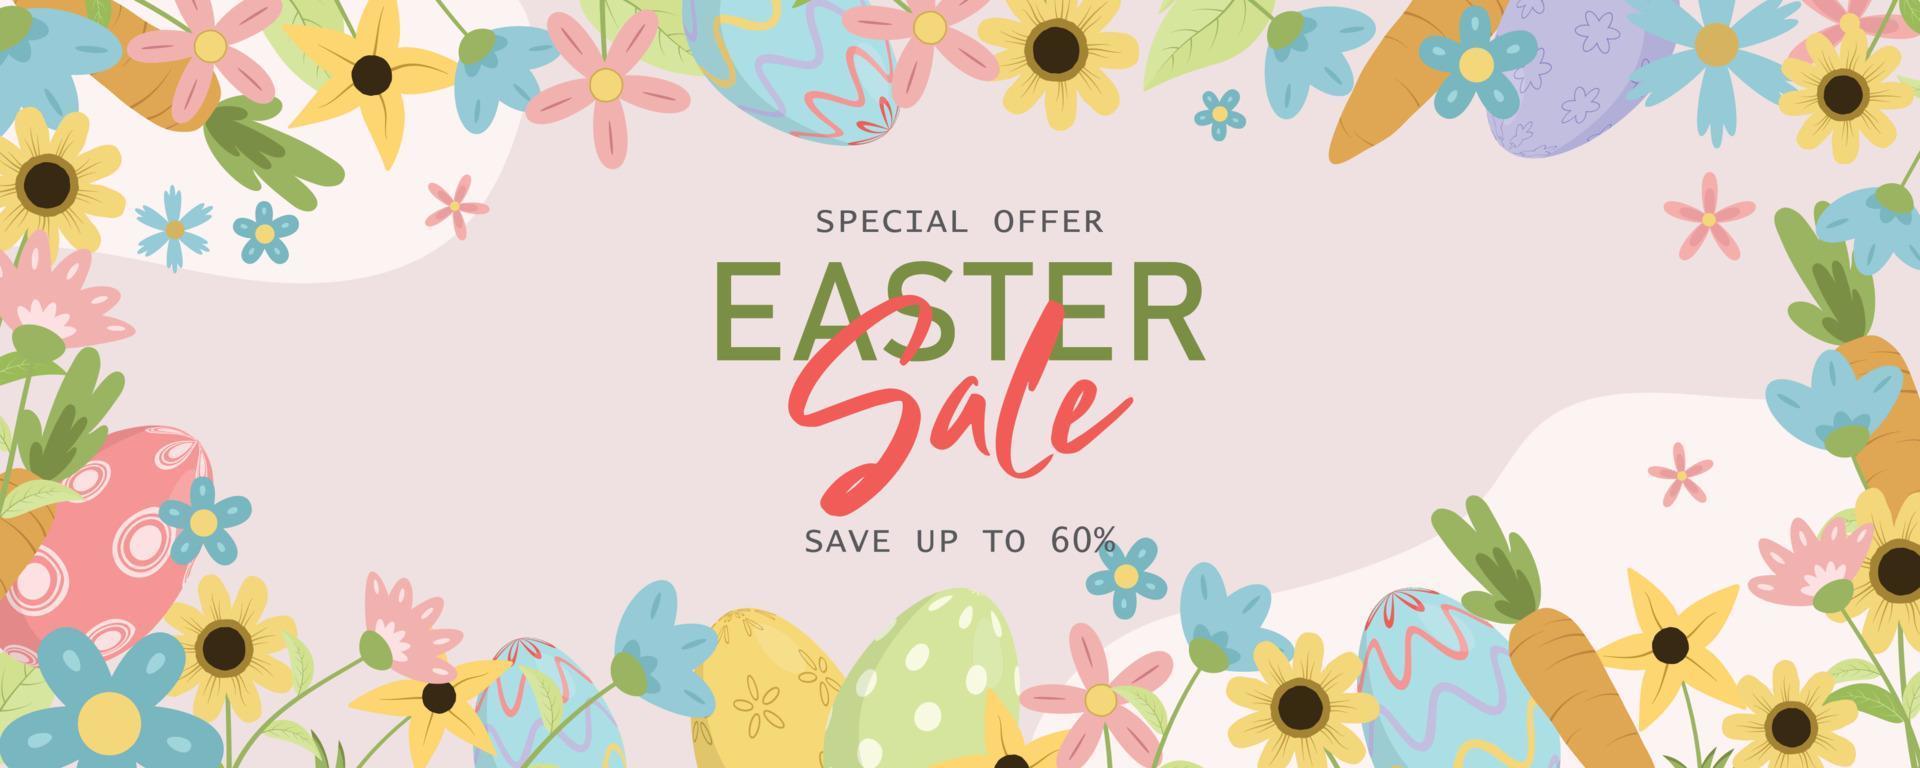 Easter sale horizontal banner template vector